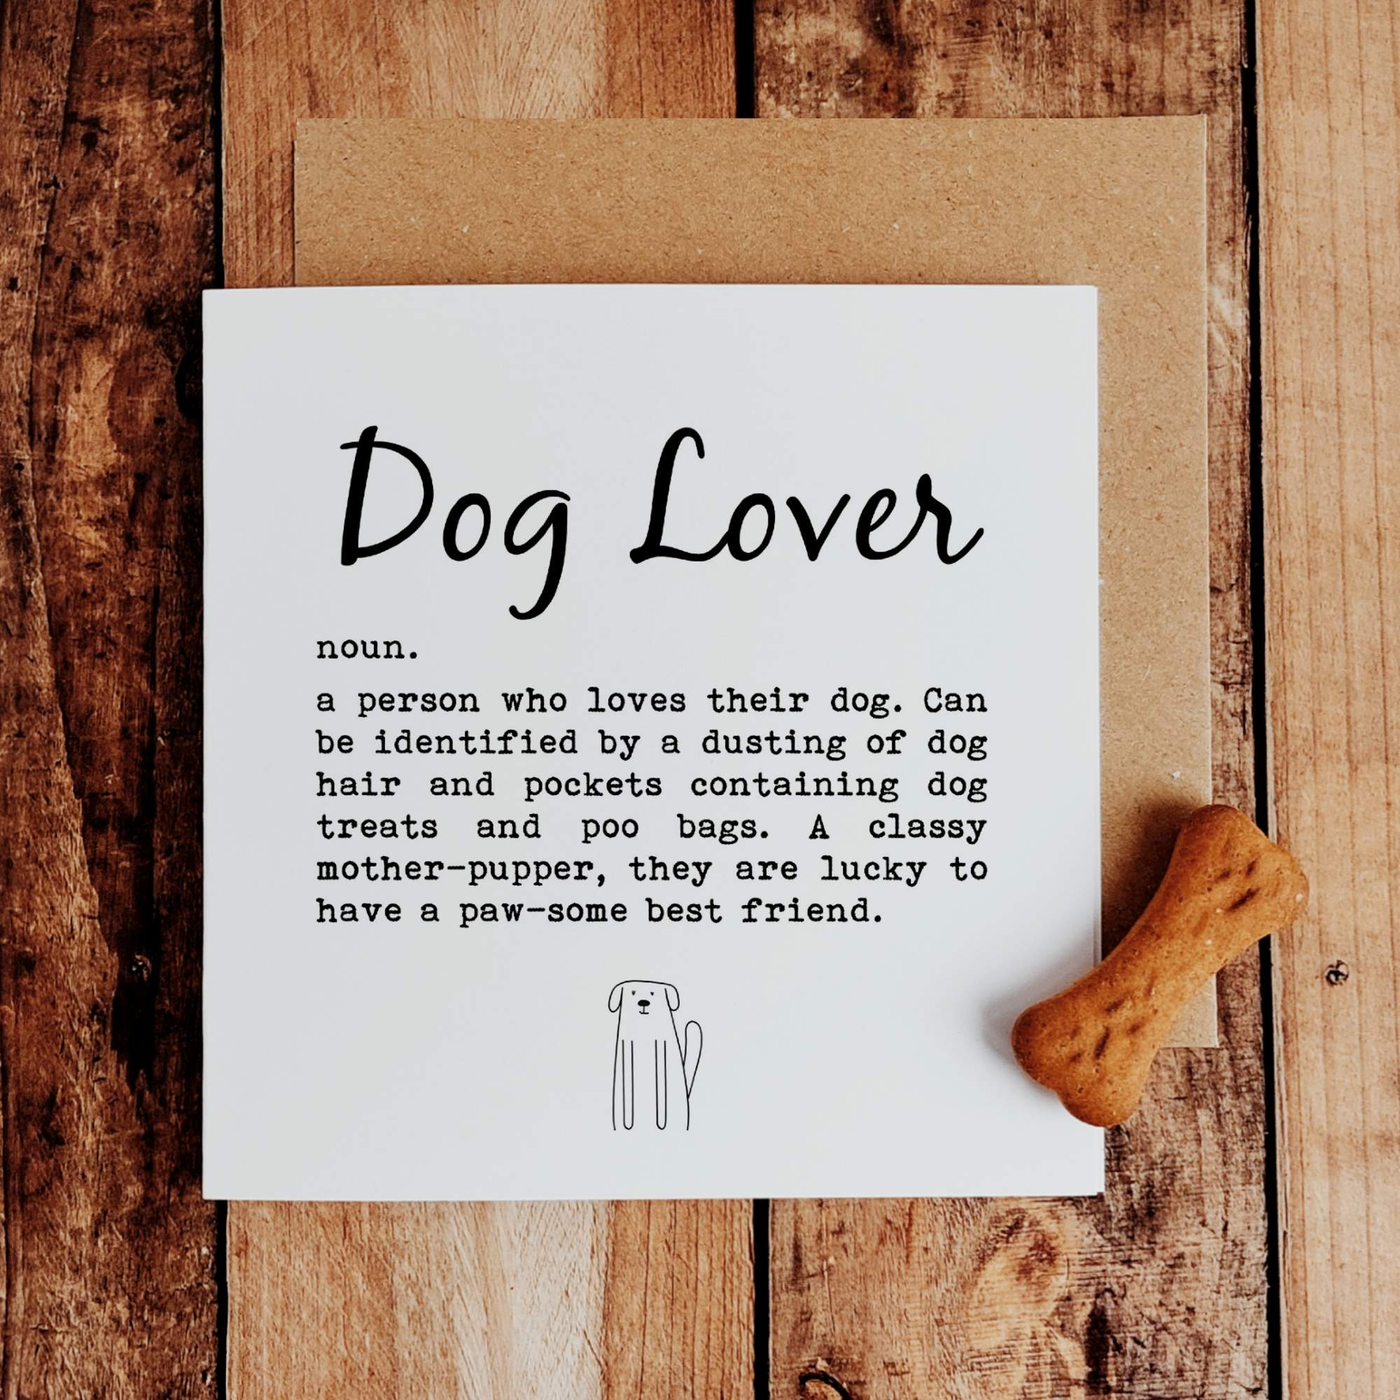 Dog Lover - Greetings Card-Worry Less Design-Dogs,Greetings-Card